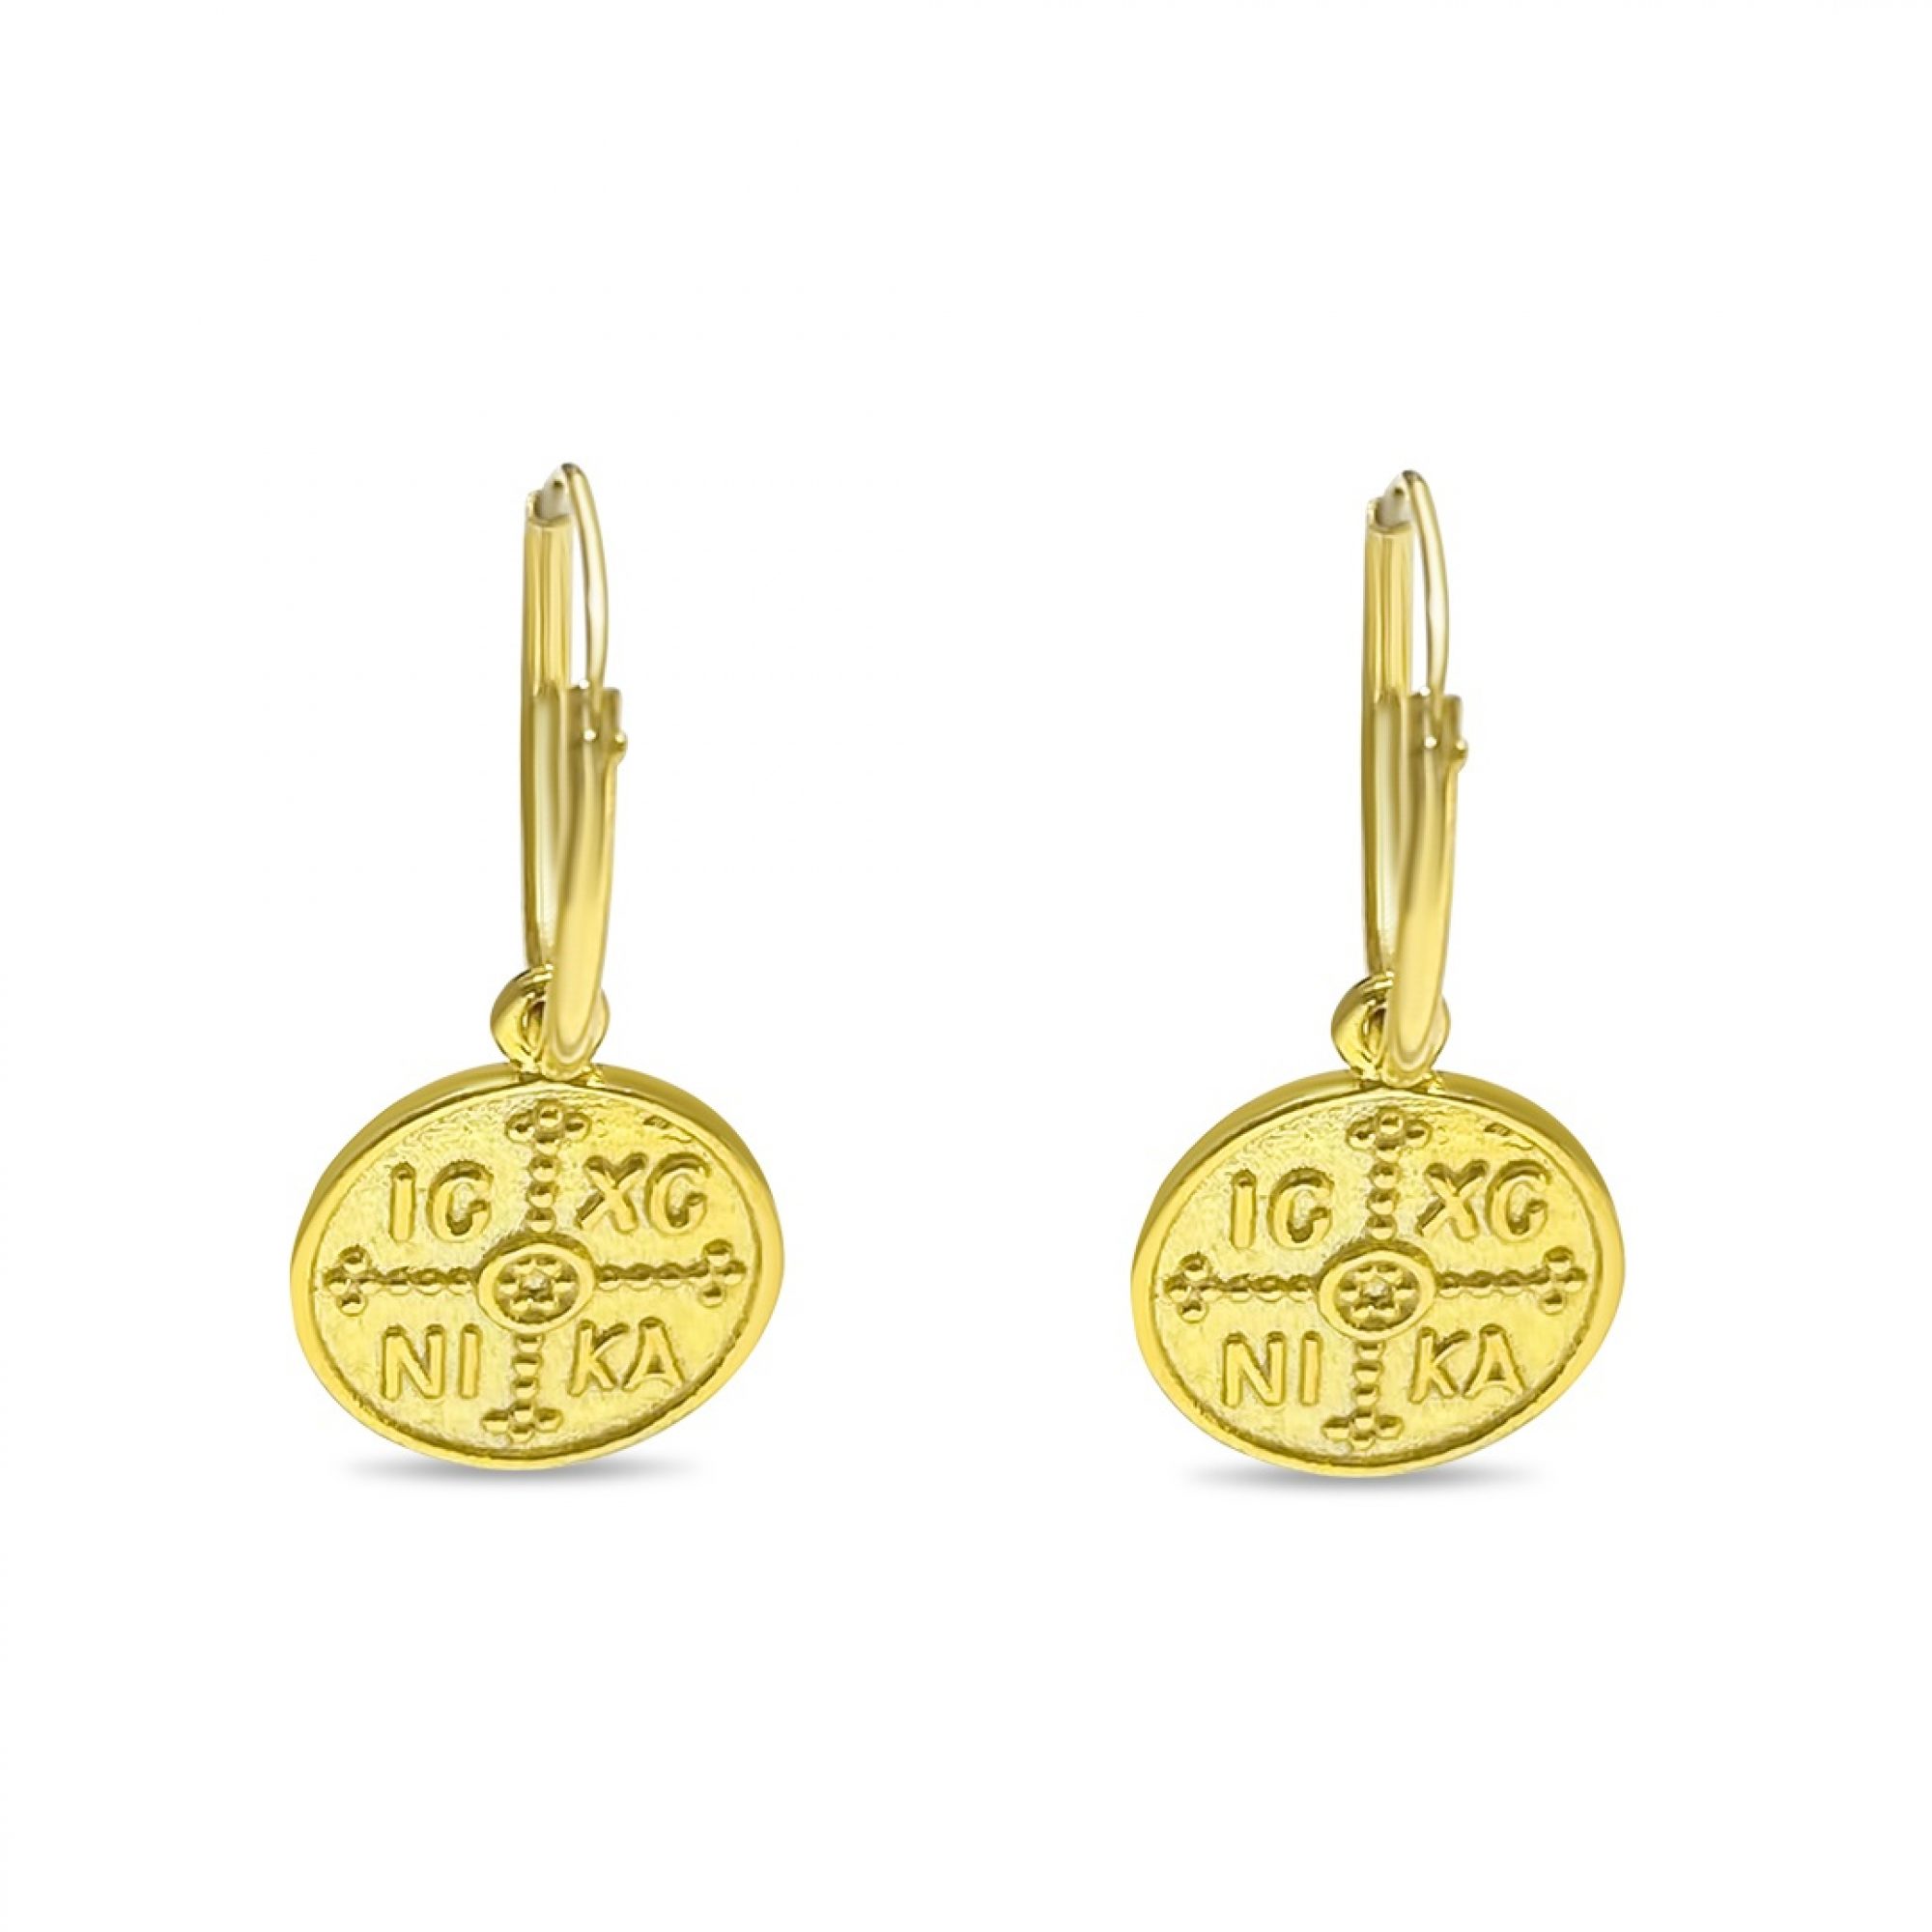 Gold plated constantine dangle earrings